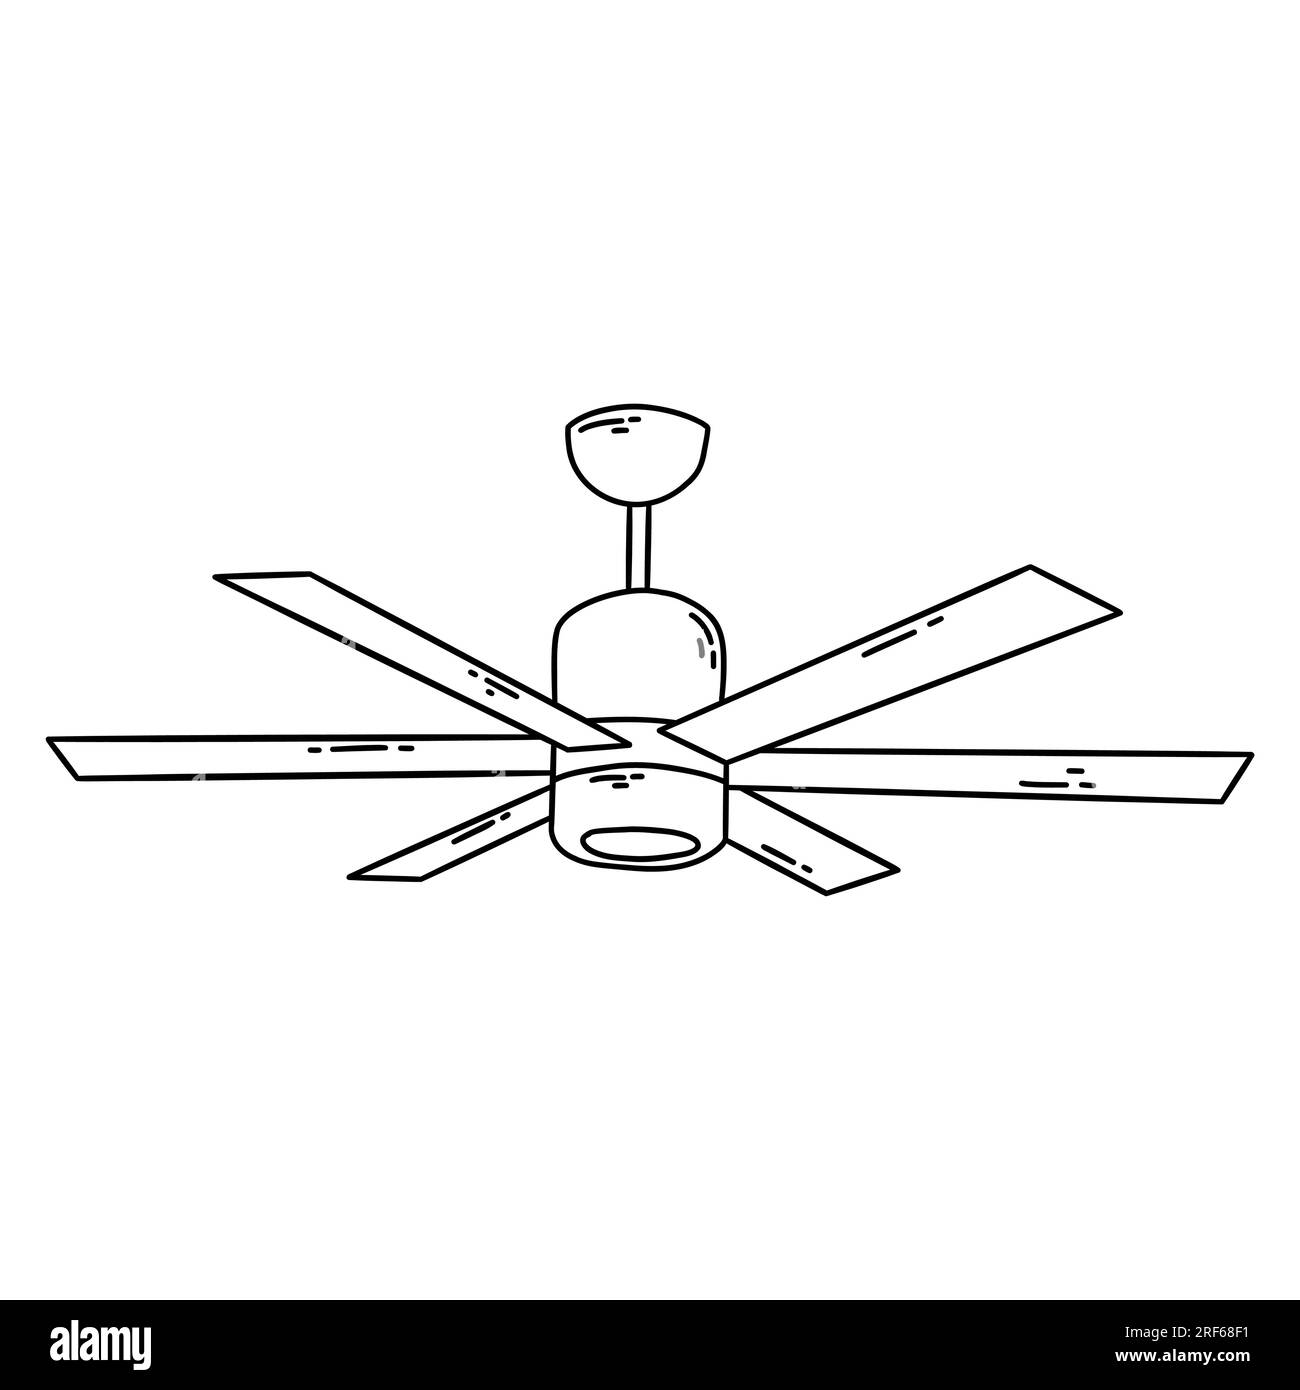 Solved: C Figure 3 shows a sketch of the outline of the face of a ceiling  fan viewed from below. [geometry]